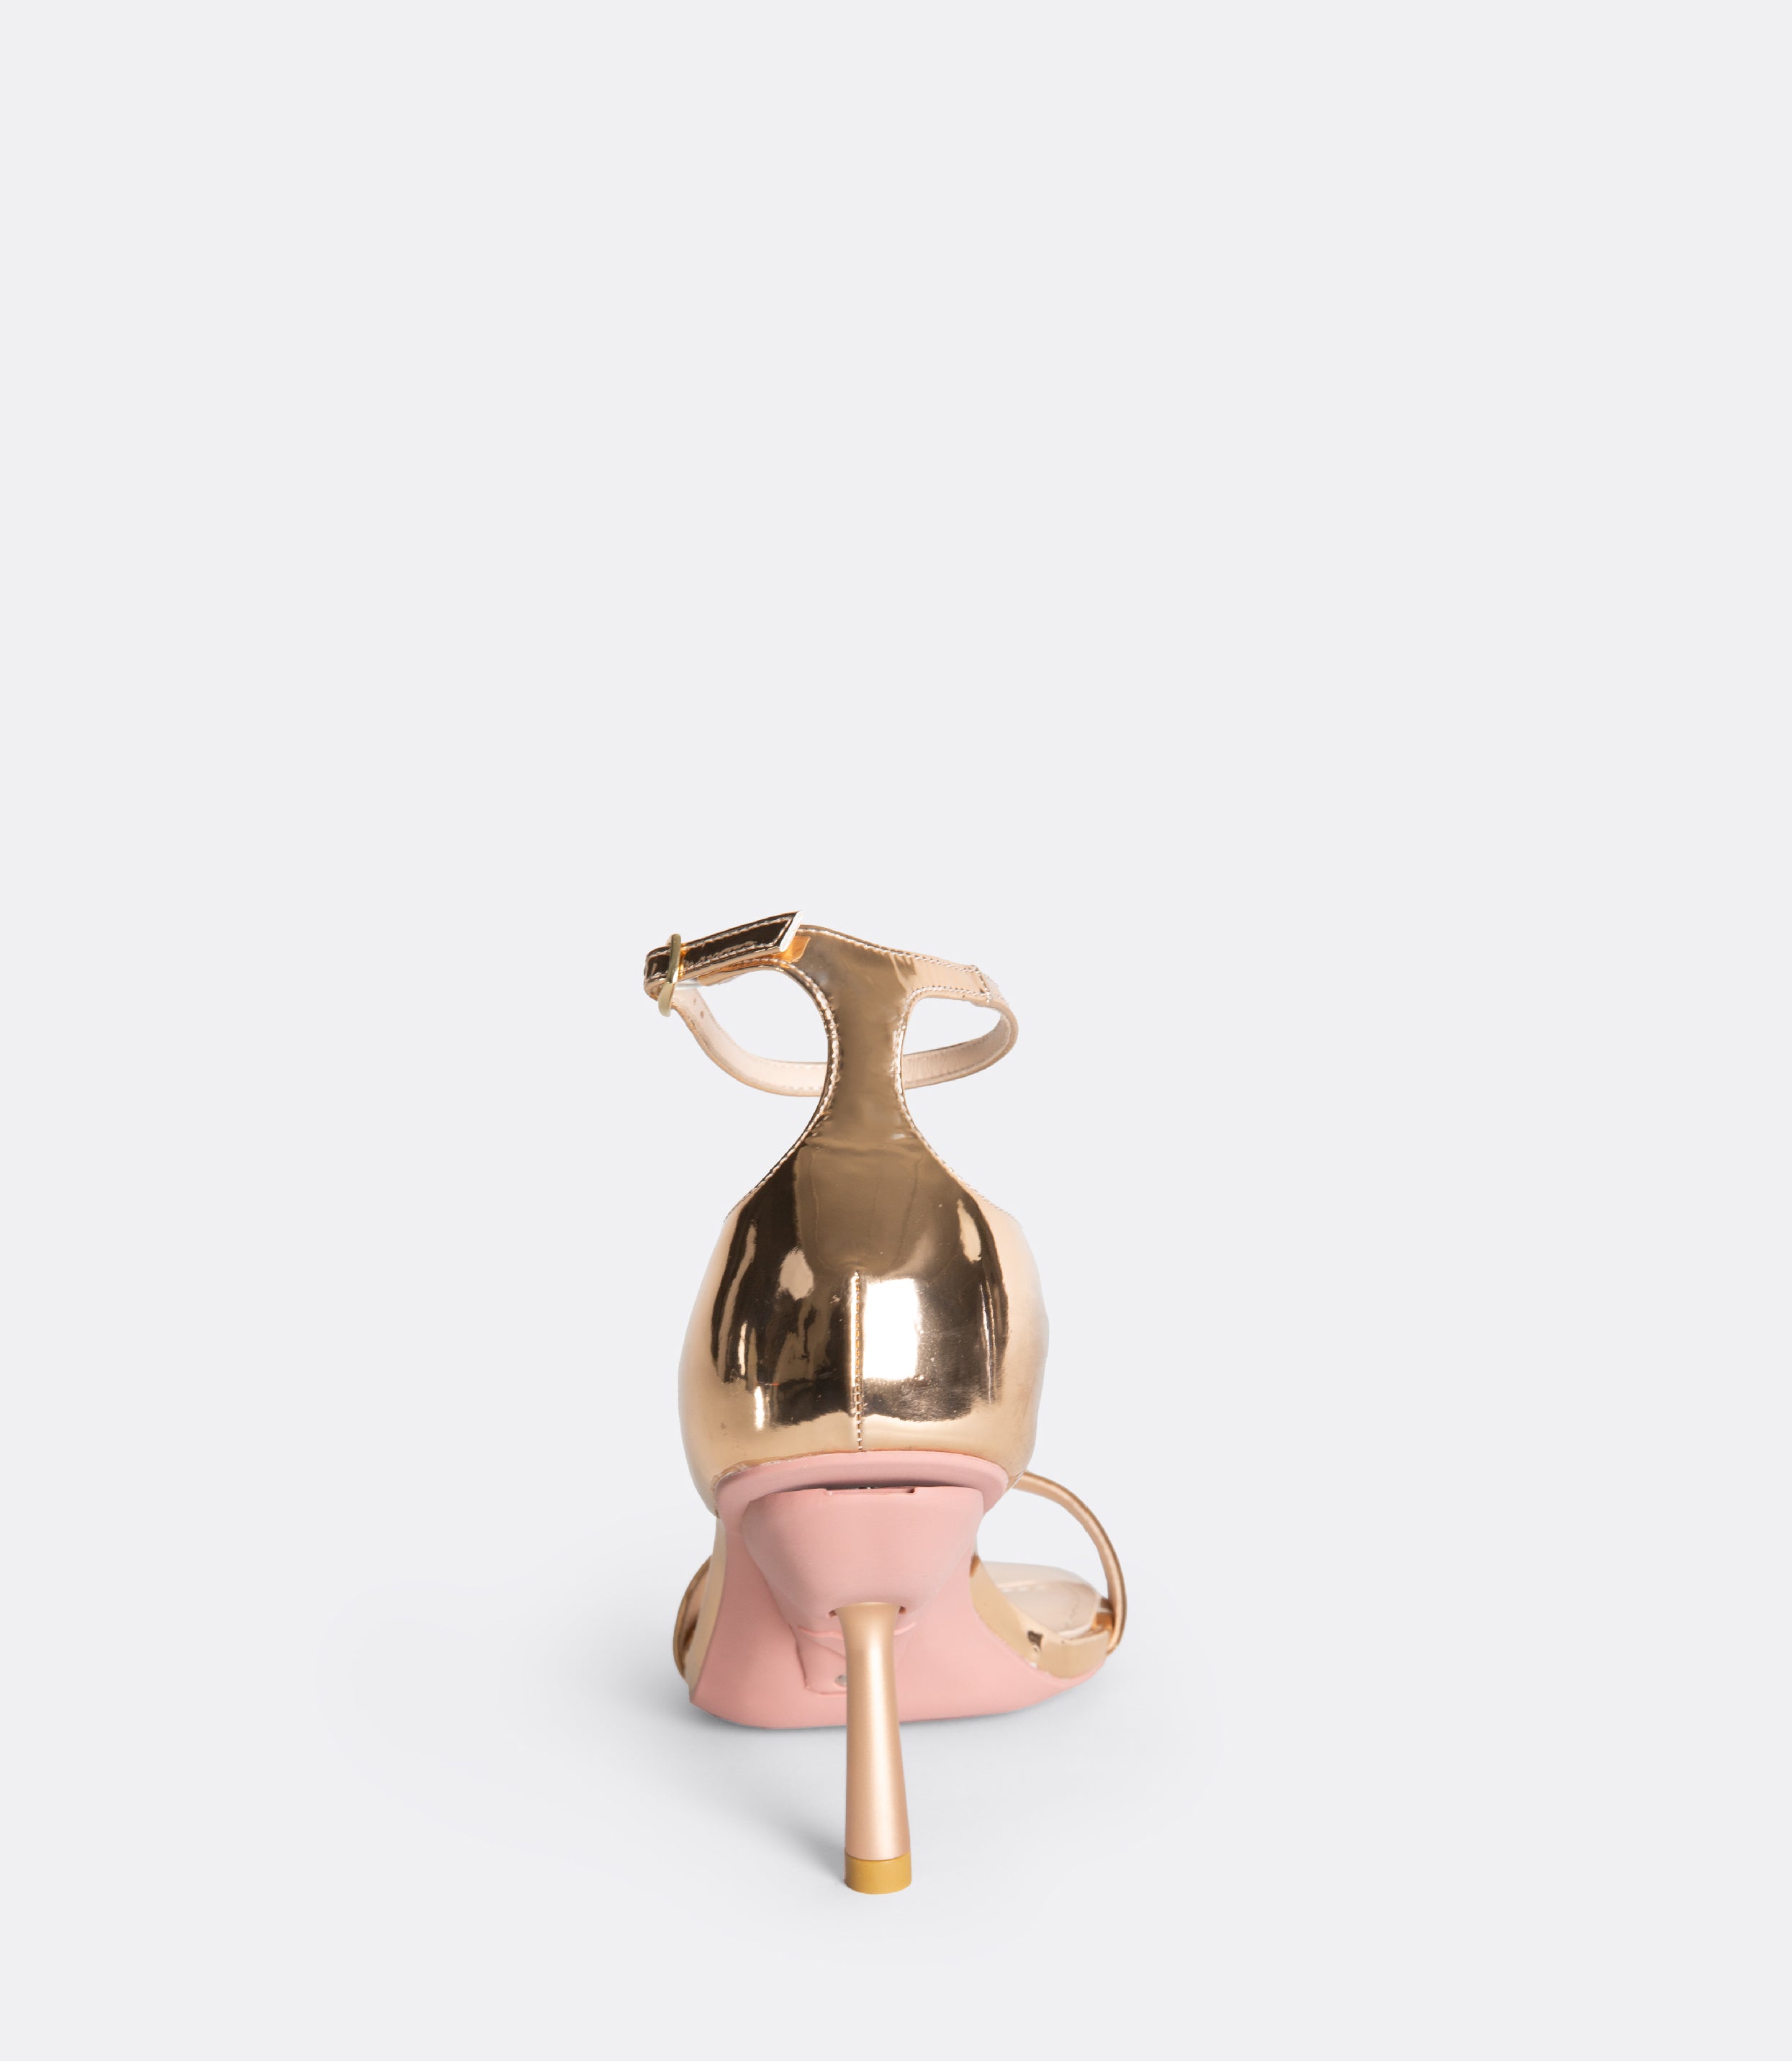 Back view of the rose gold editor sandal.